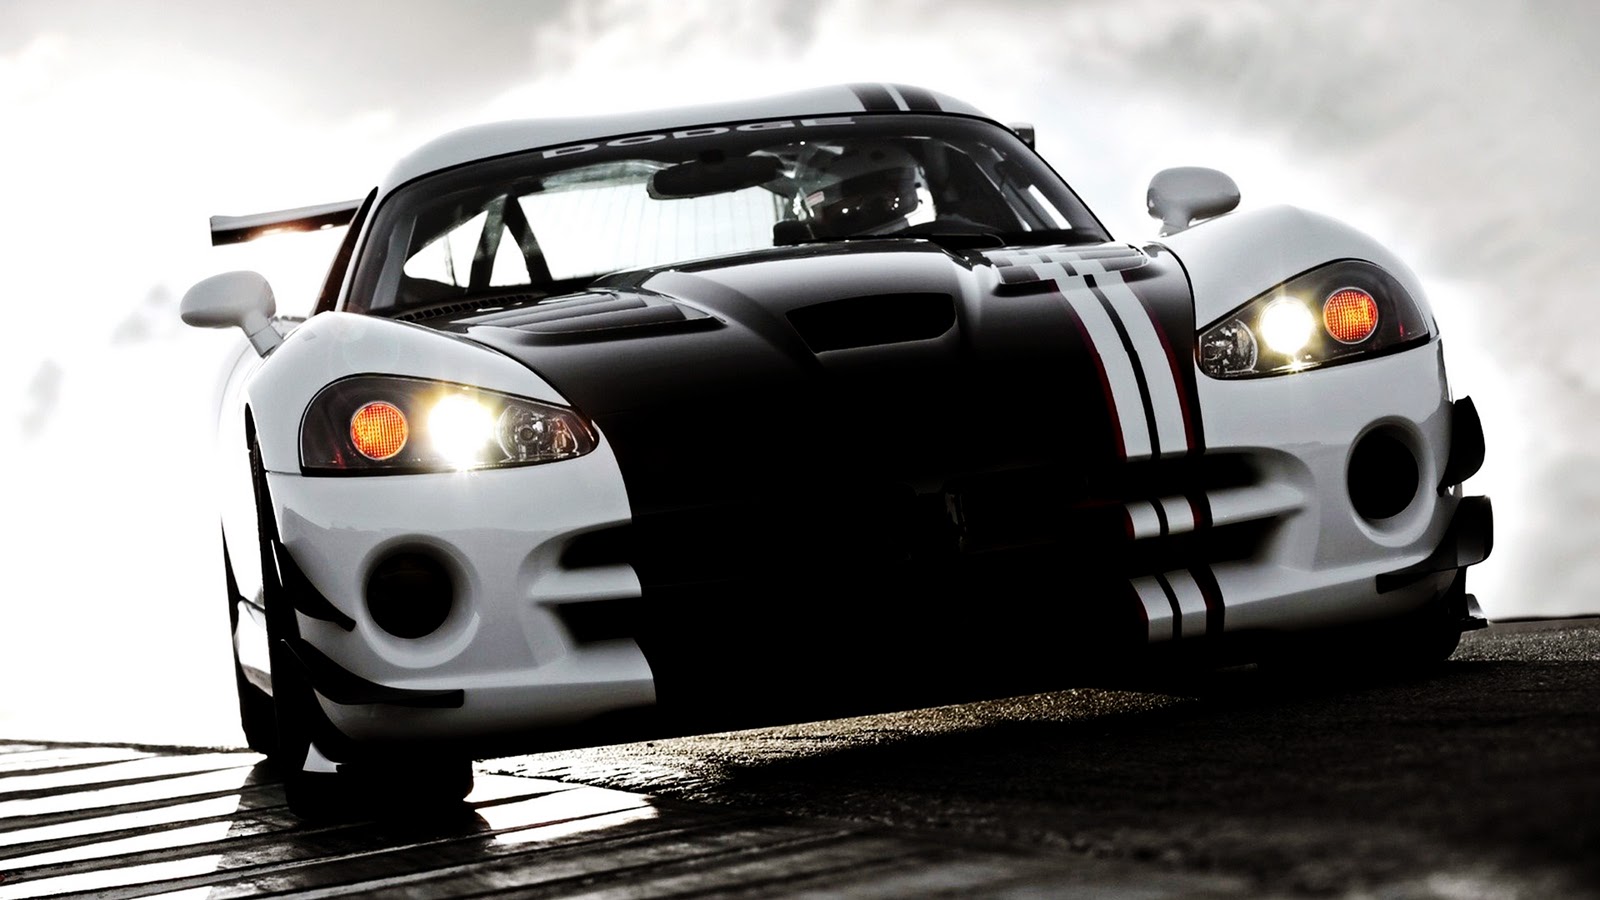 White Dodge Viper Acr HD Wallpapers HD Wallpapers Backgrounds